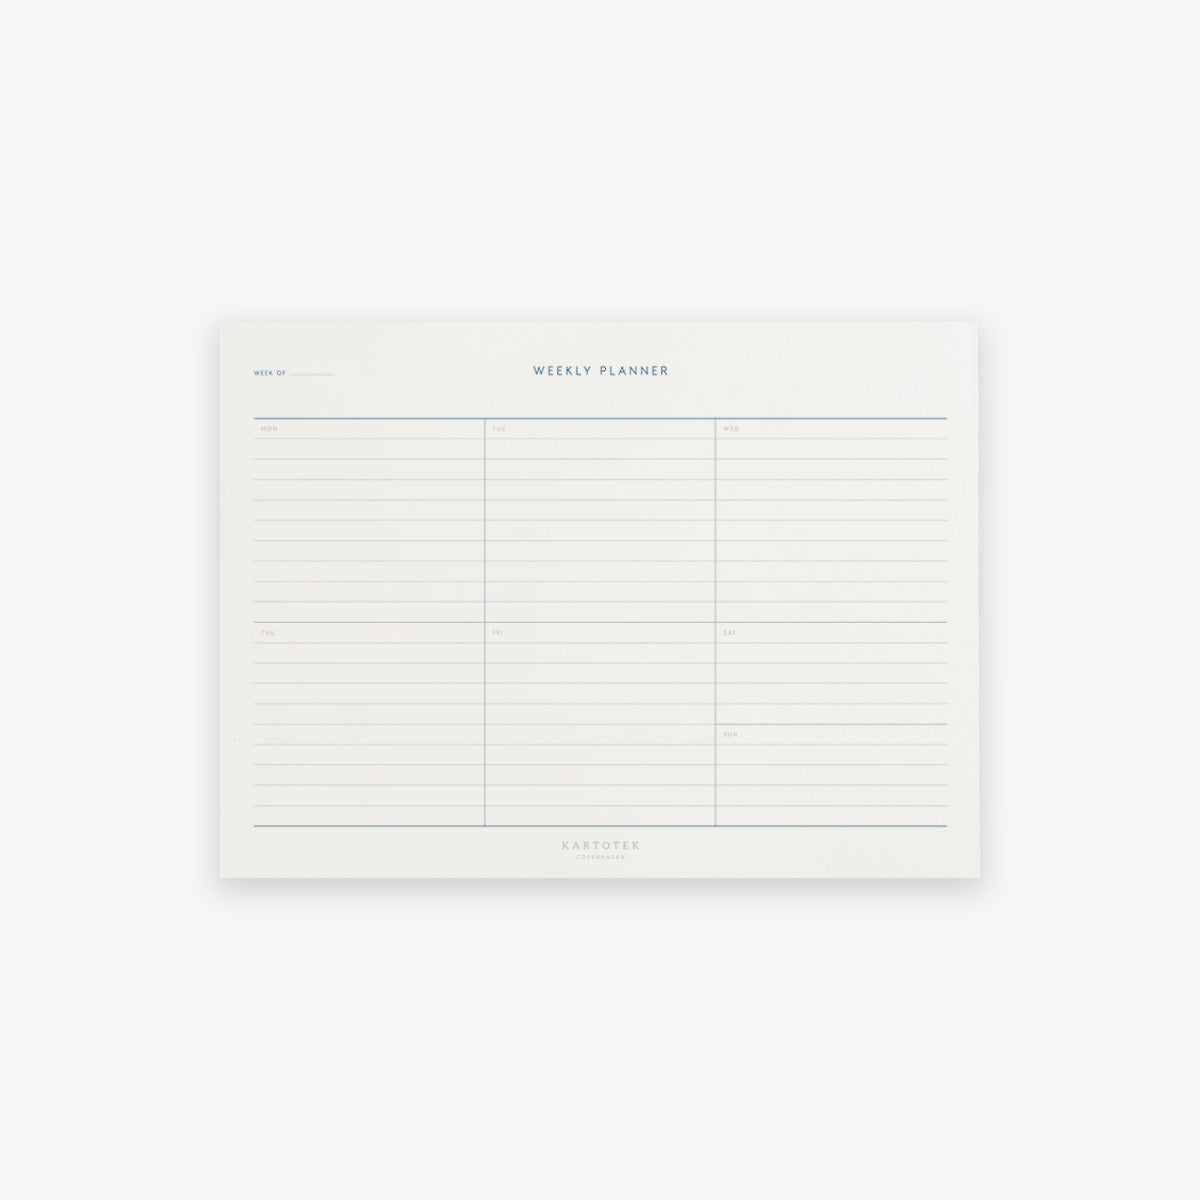 WEEKLY PLANNER NOTEPAD // A5